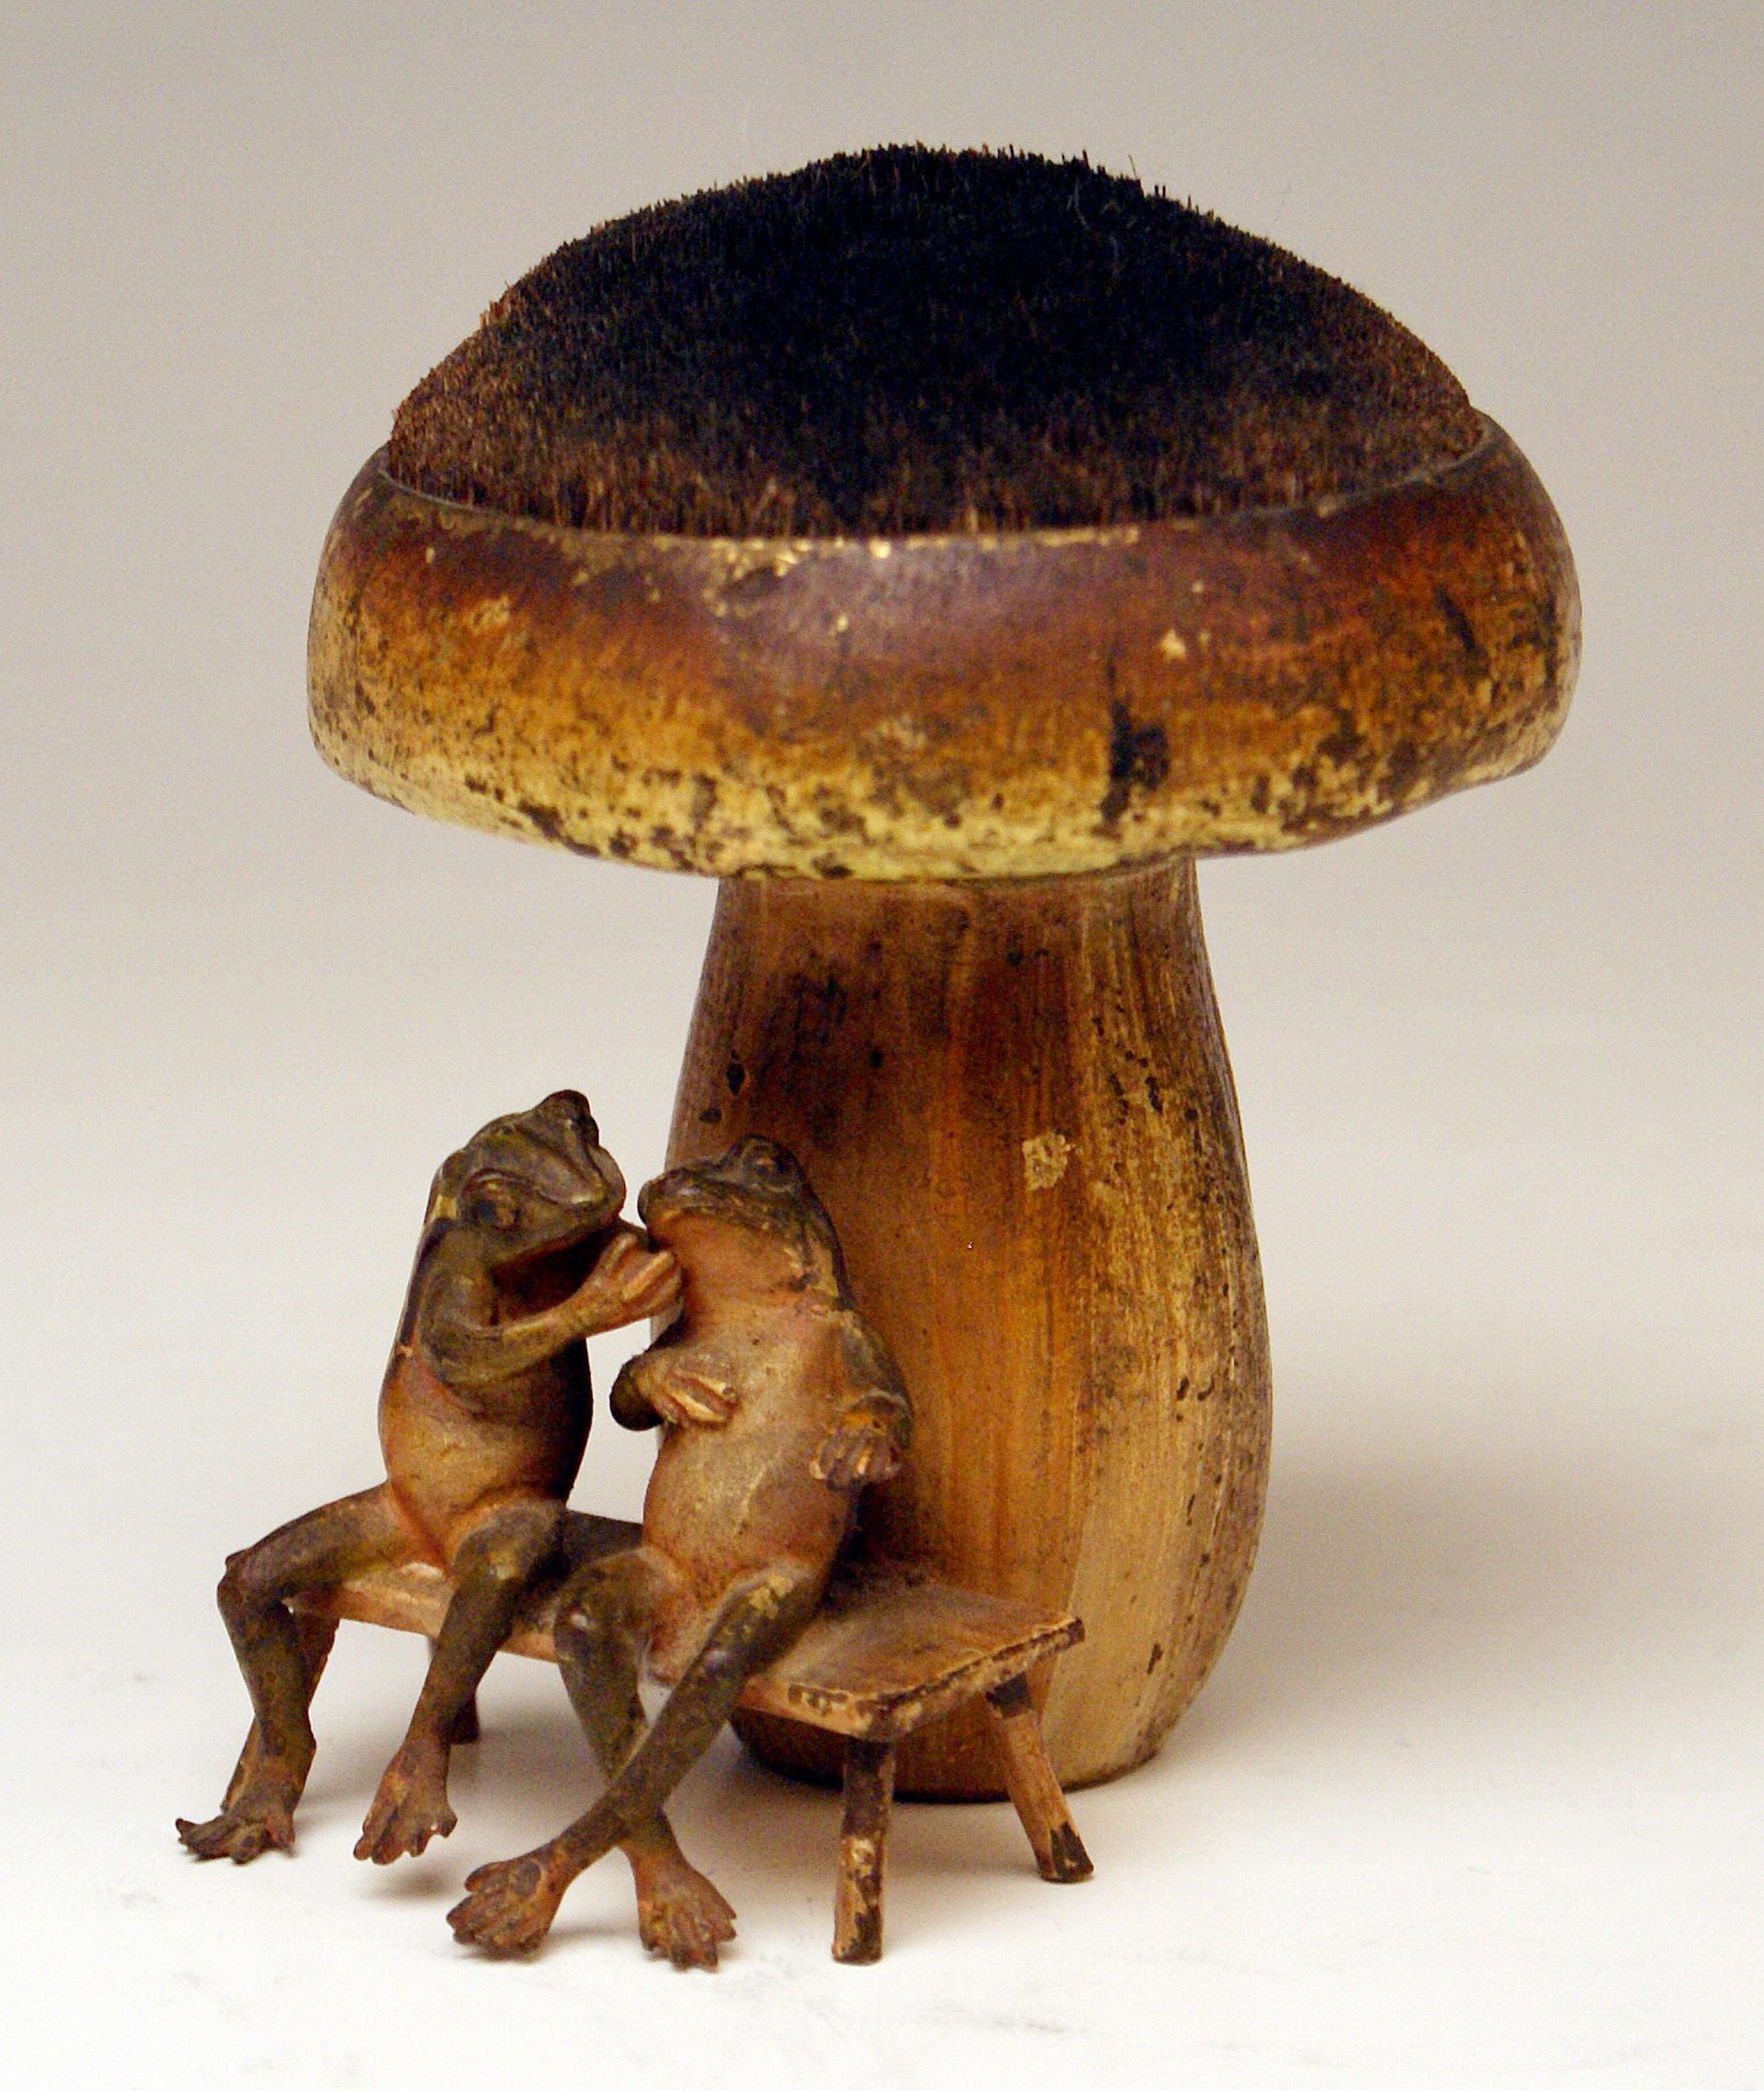 Stunning bronze item having function of a pincushion - it is very rare!
Two frogs have taken place on a garden bench / behind them there is a tall mushroom visible: The mushroom's upper side is made of soft material so that needles can be held